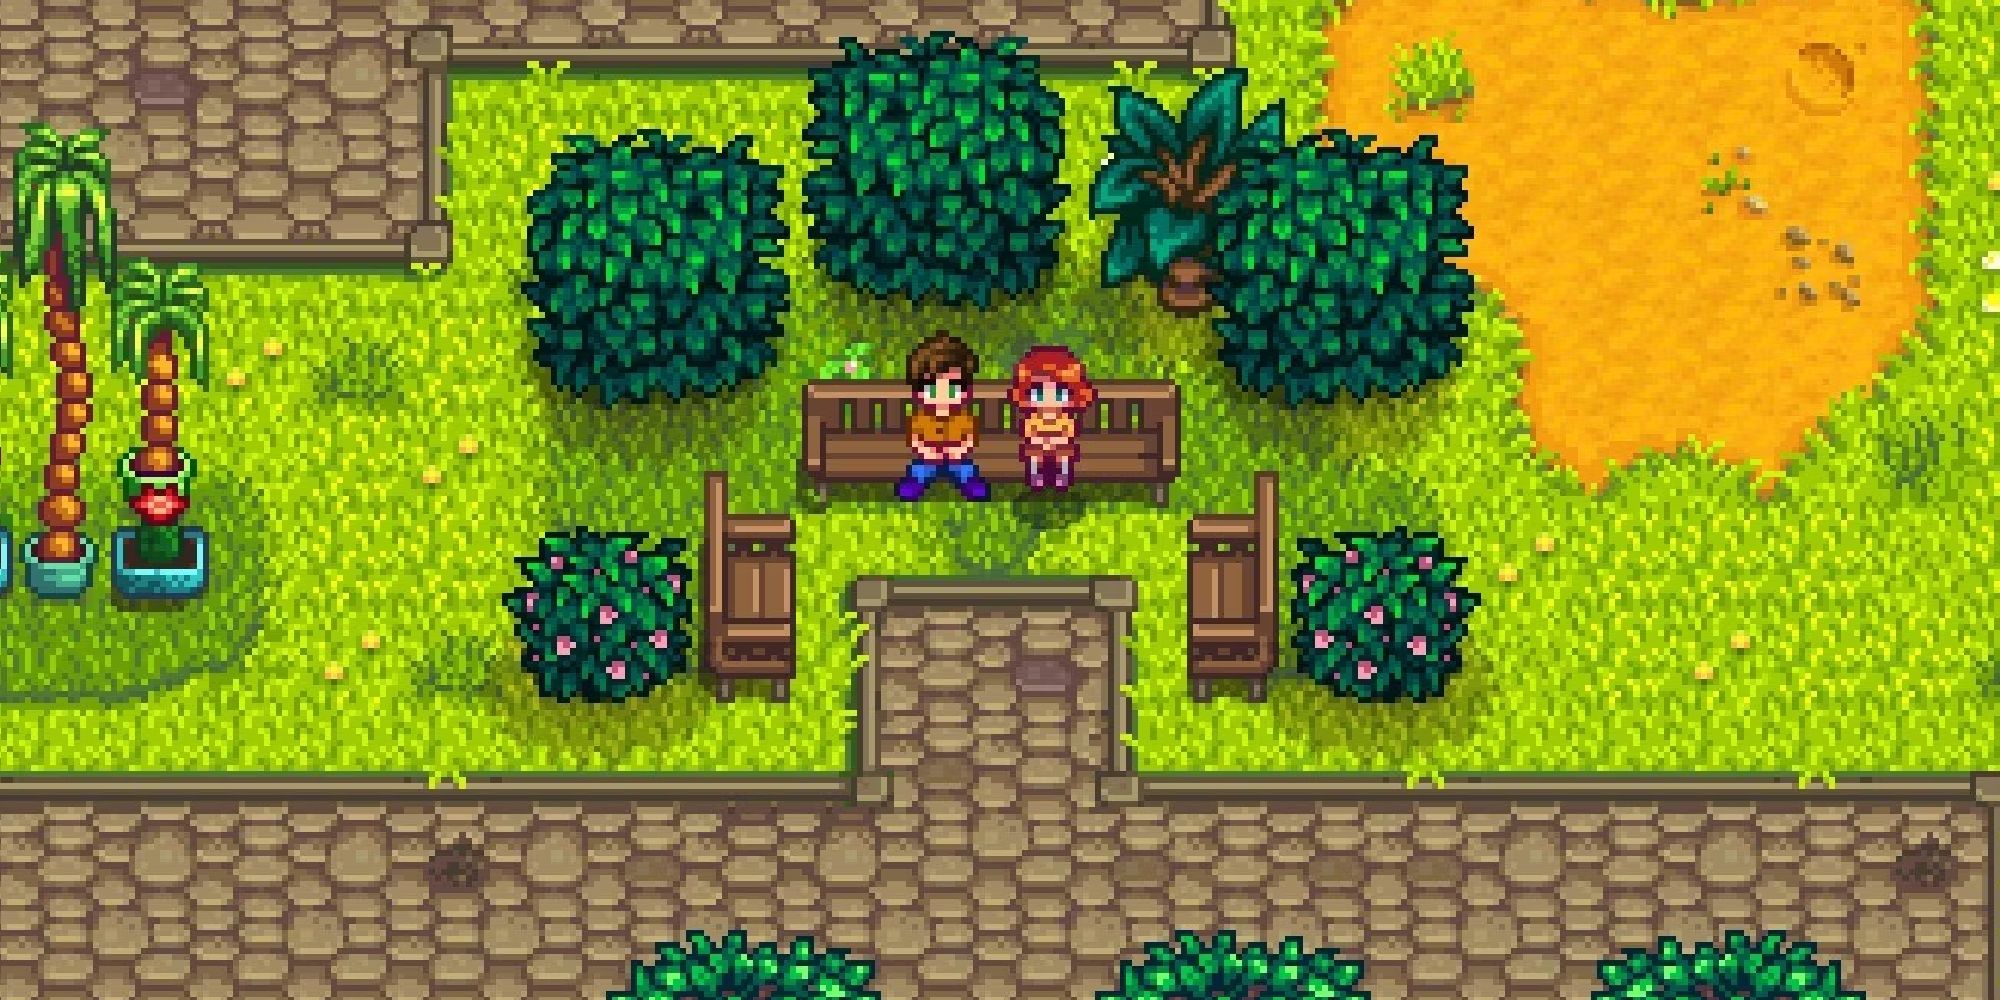 stardew valley player and penny sitting on a bench together